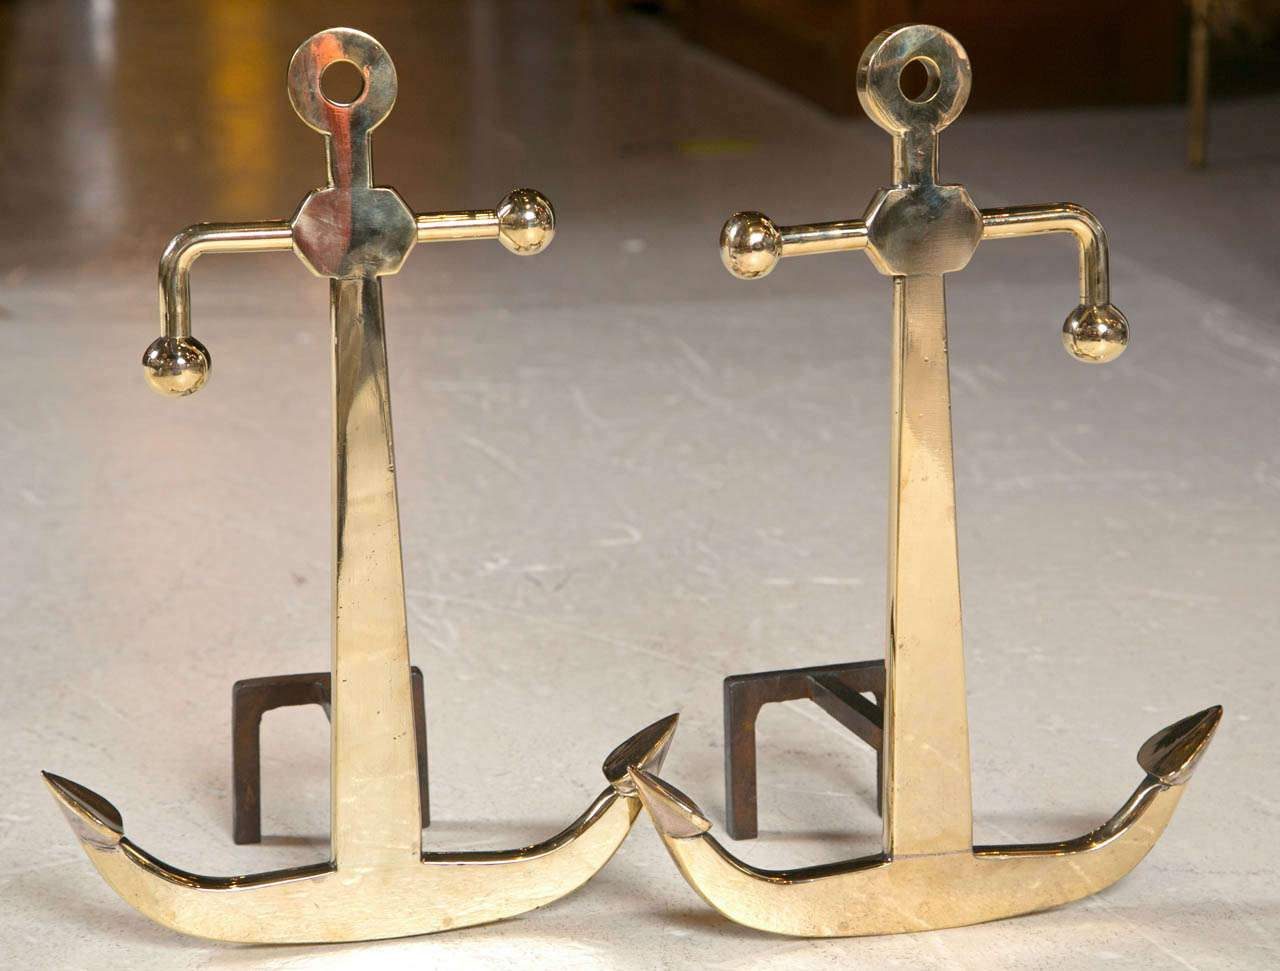 These brass vintage art moderne anchor andirons are of incredible quality--solid, heavy and unique. Notice there is a left and right one (not duplicates of each other, but mirror images). Newly polished un-lacquered brass. 